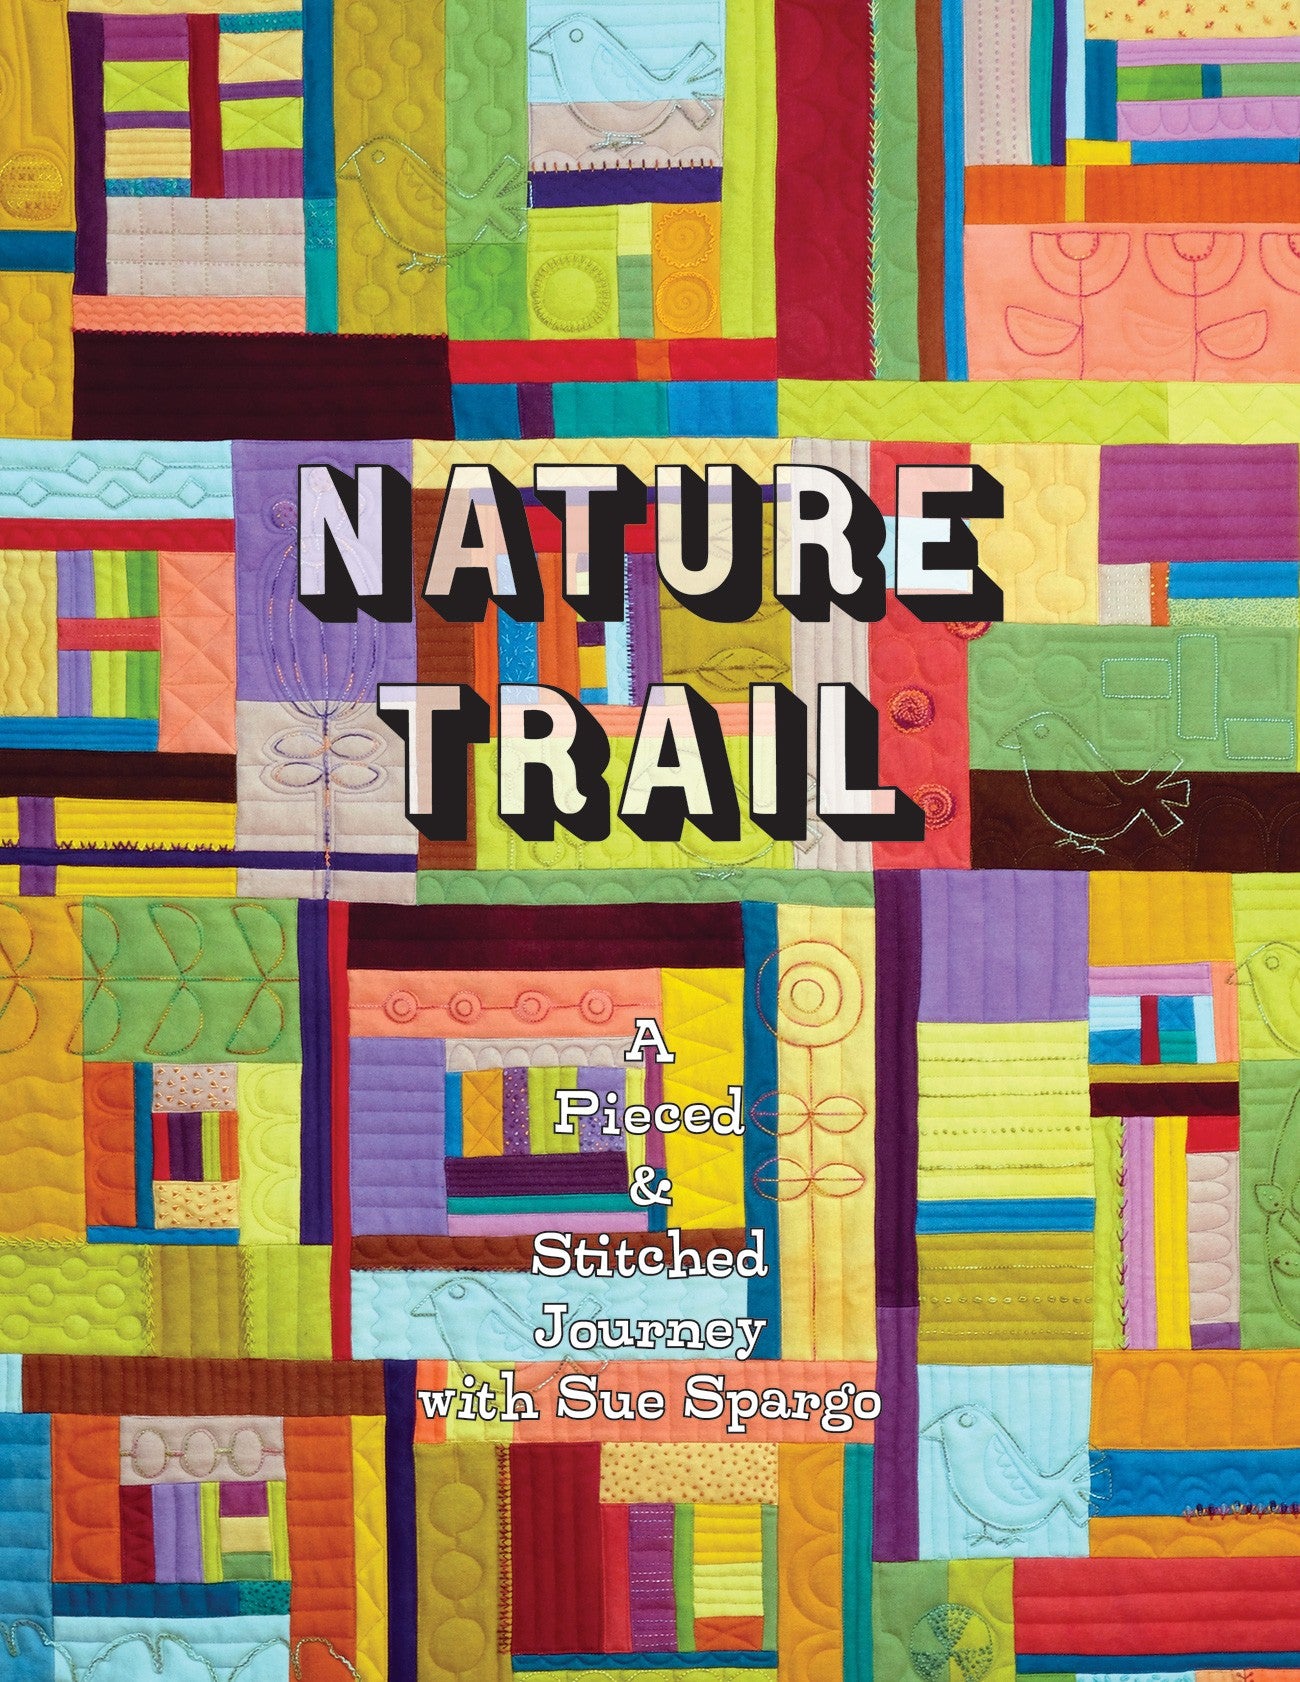 Nature Trail - Applique, Embroidery, and Quilt Pattern Book by Sue Spargo of Folk Art Quilts